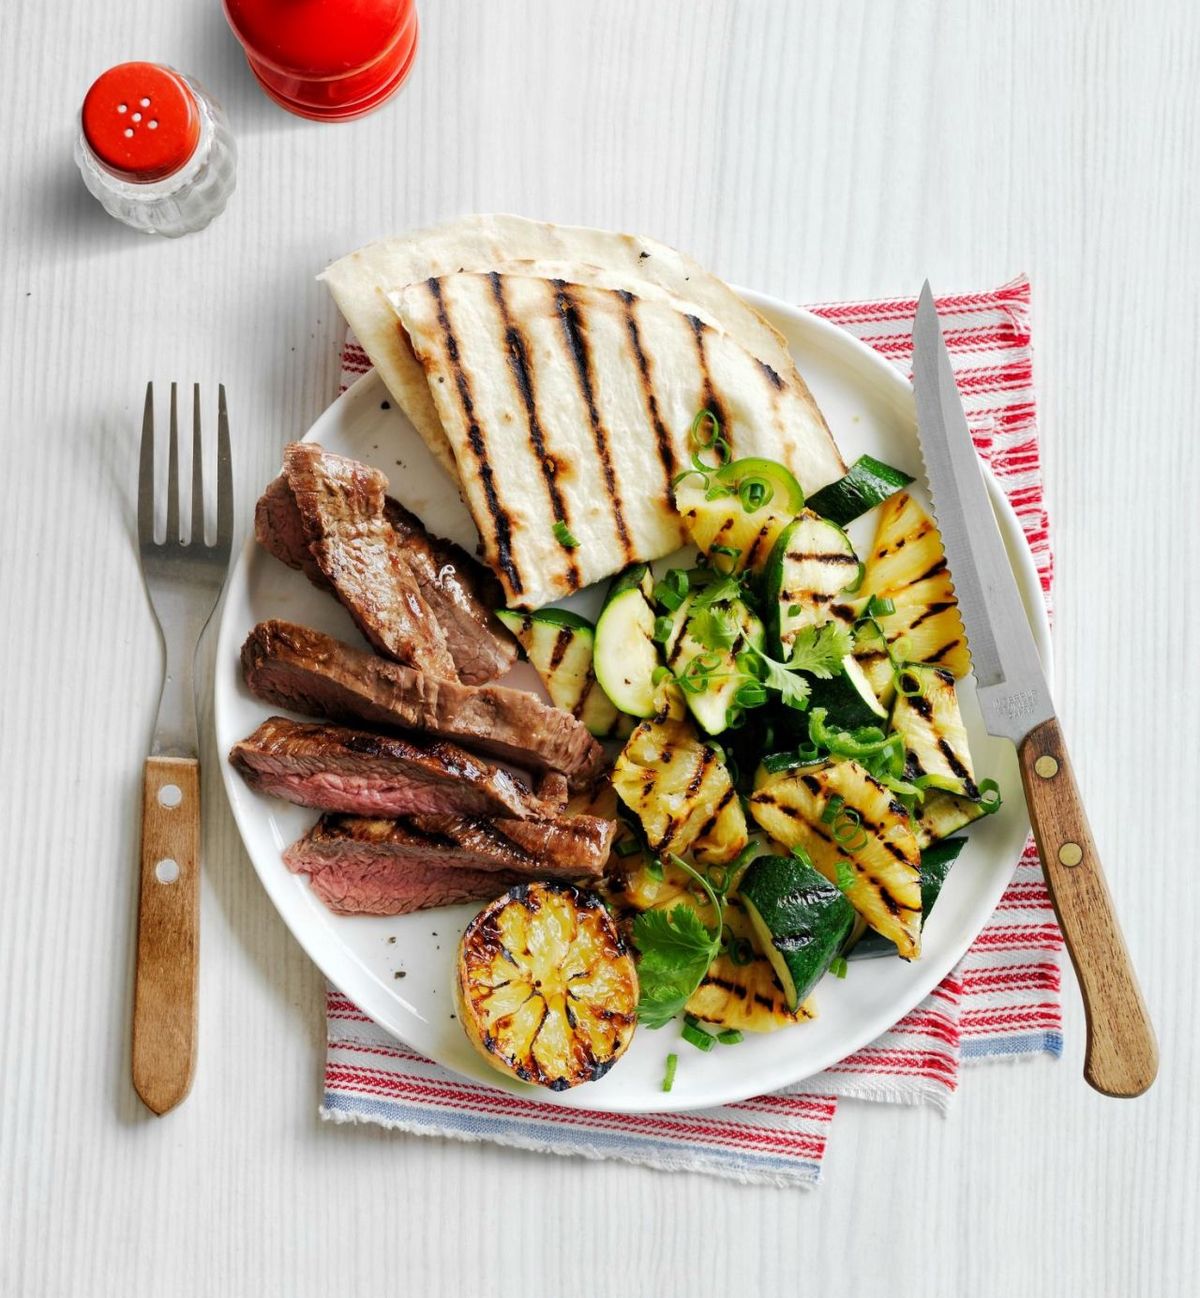 Grilled Skirt Steak with Charred Zucchini and Pineapple Salad